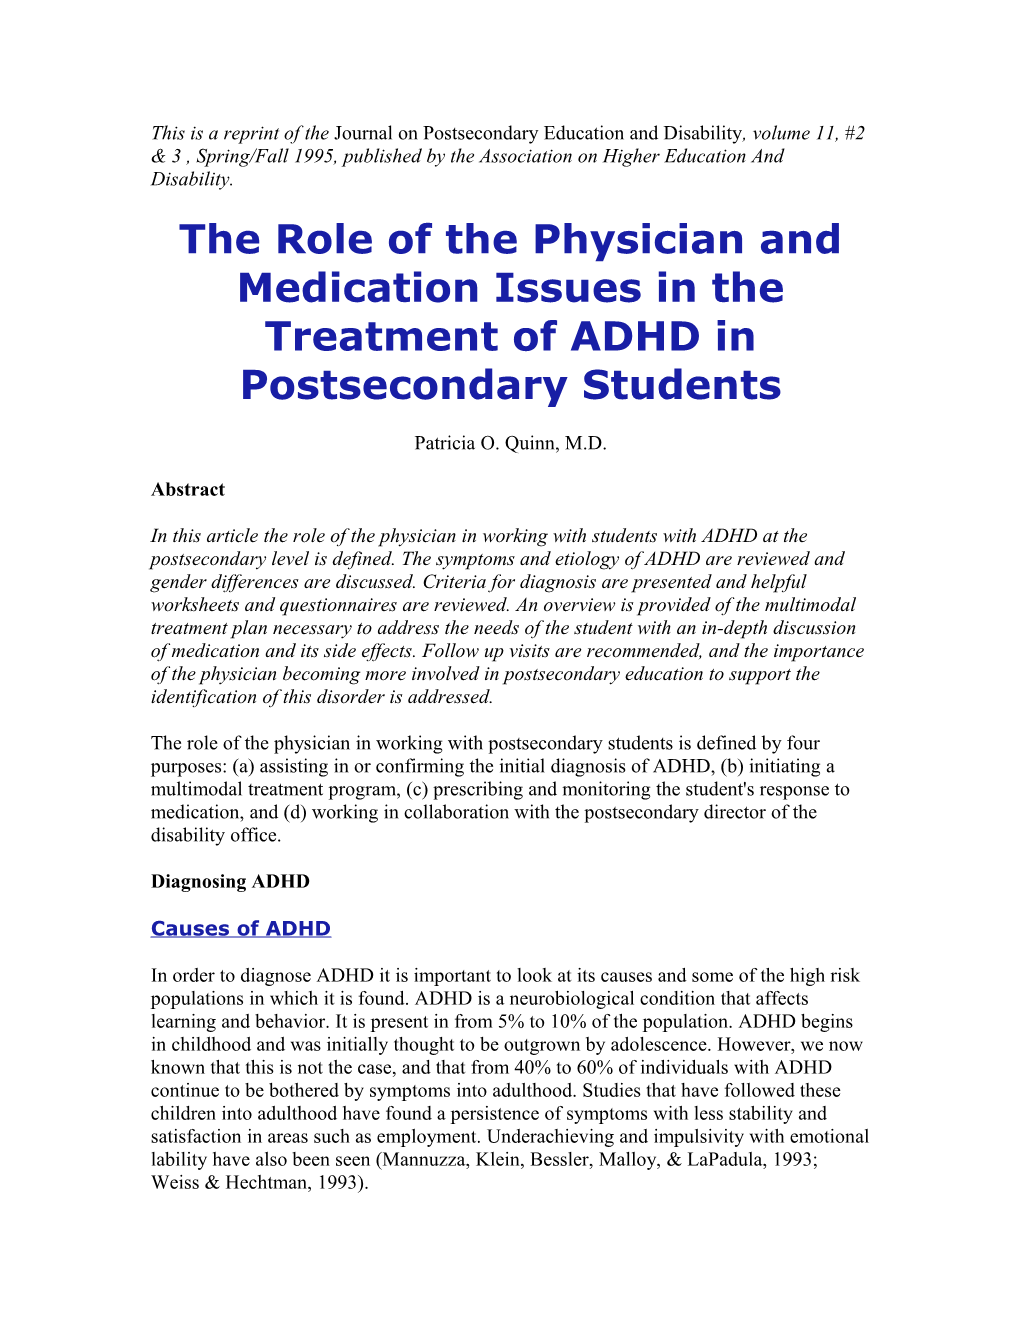 The Role of the Physician and Medication Issues in the Treatment of ADHD in Postsecondary